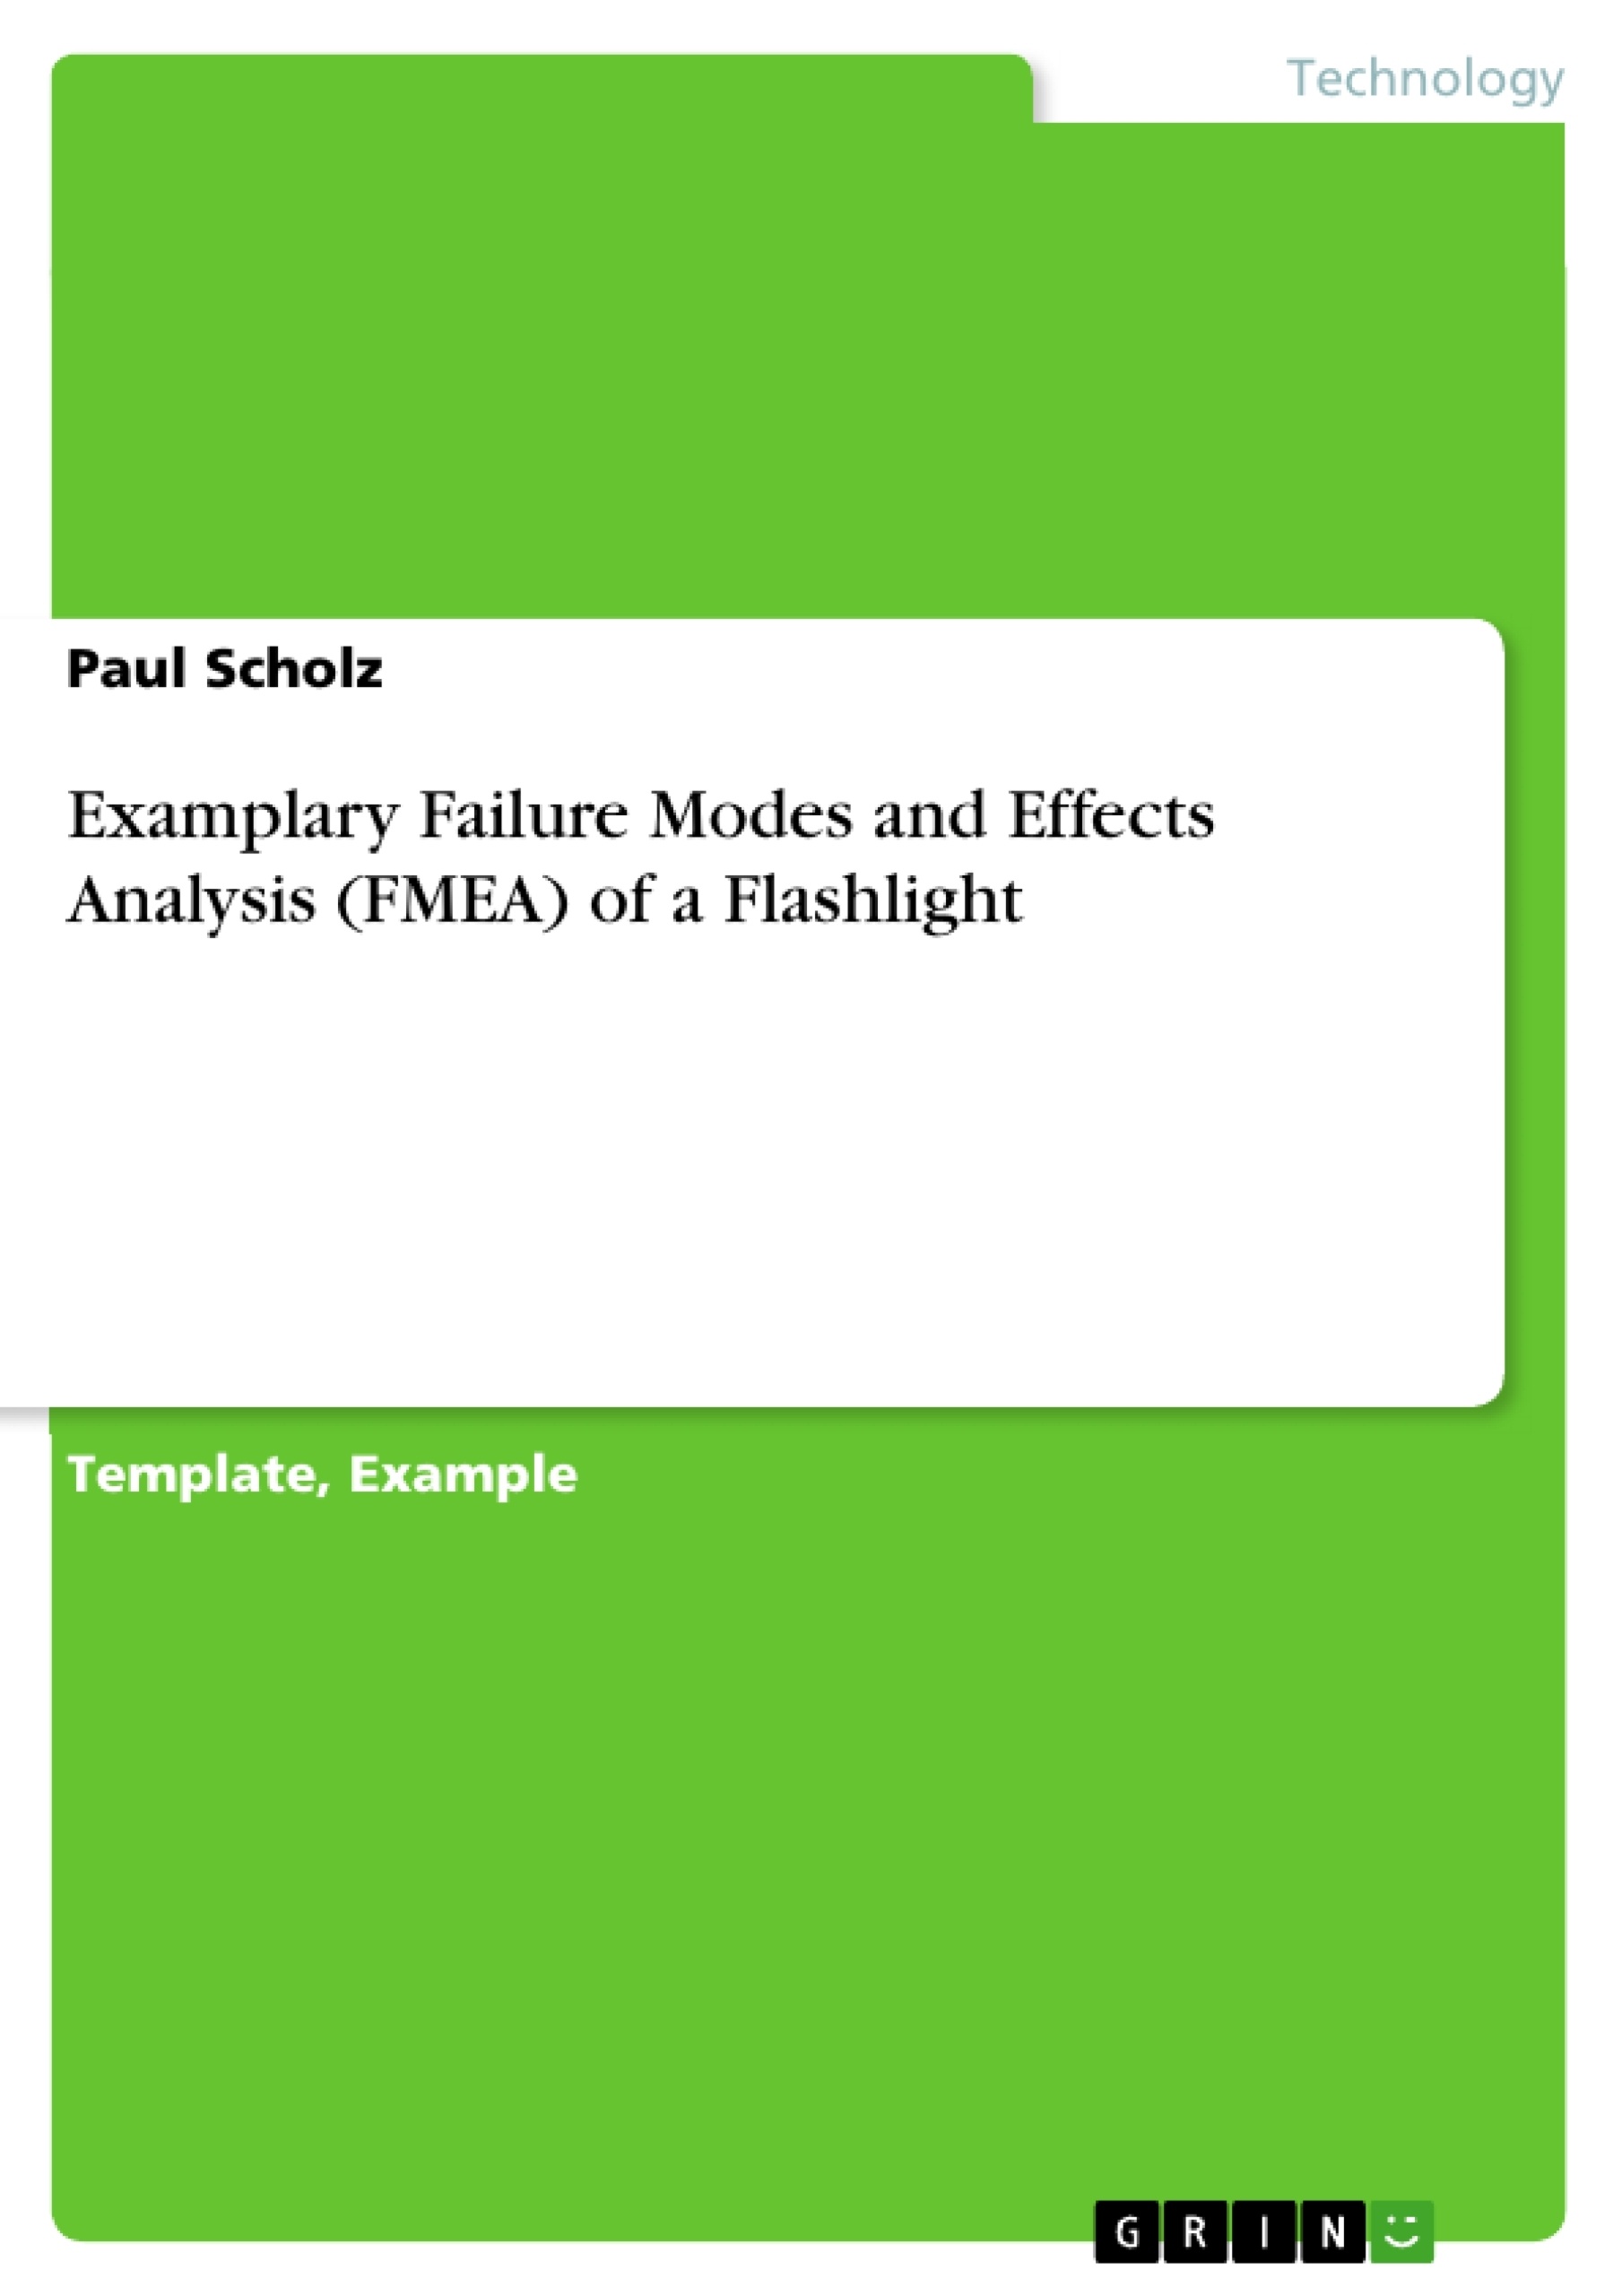 Title: Examplary Failure Modes and Effects Analysis (FMEA) of a Flashlight